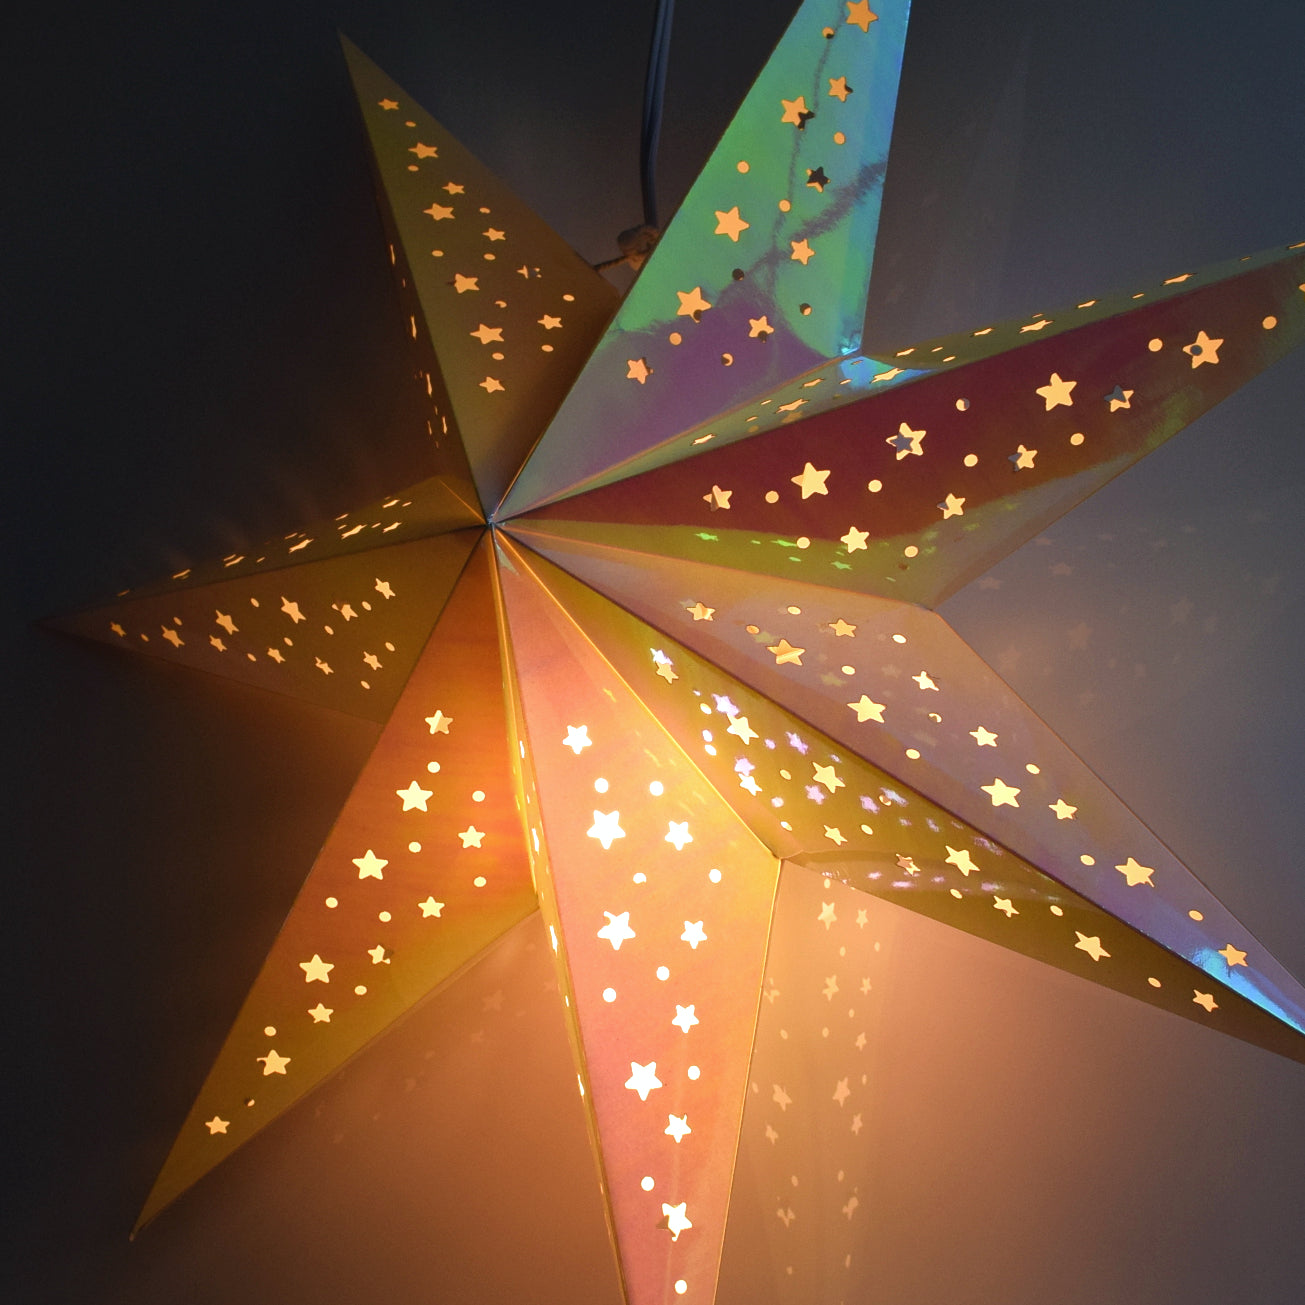 Prismatic Paper Star Lantern Decoration (22 inch Rainbow Iridescent 7-Point Lighted Star) - WillBrite.com - Gifts & Décor that Make People Happy